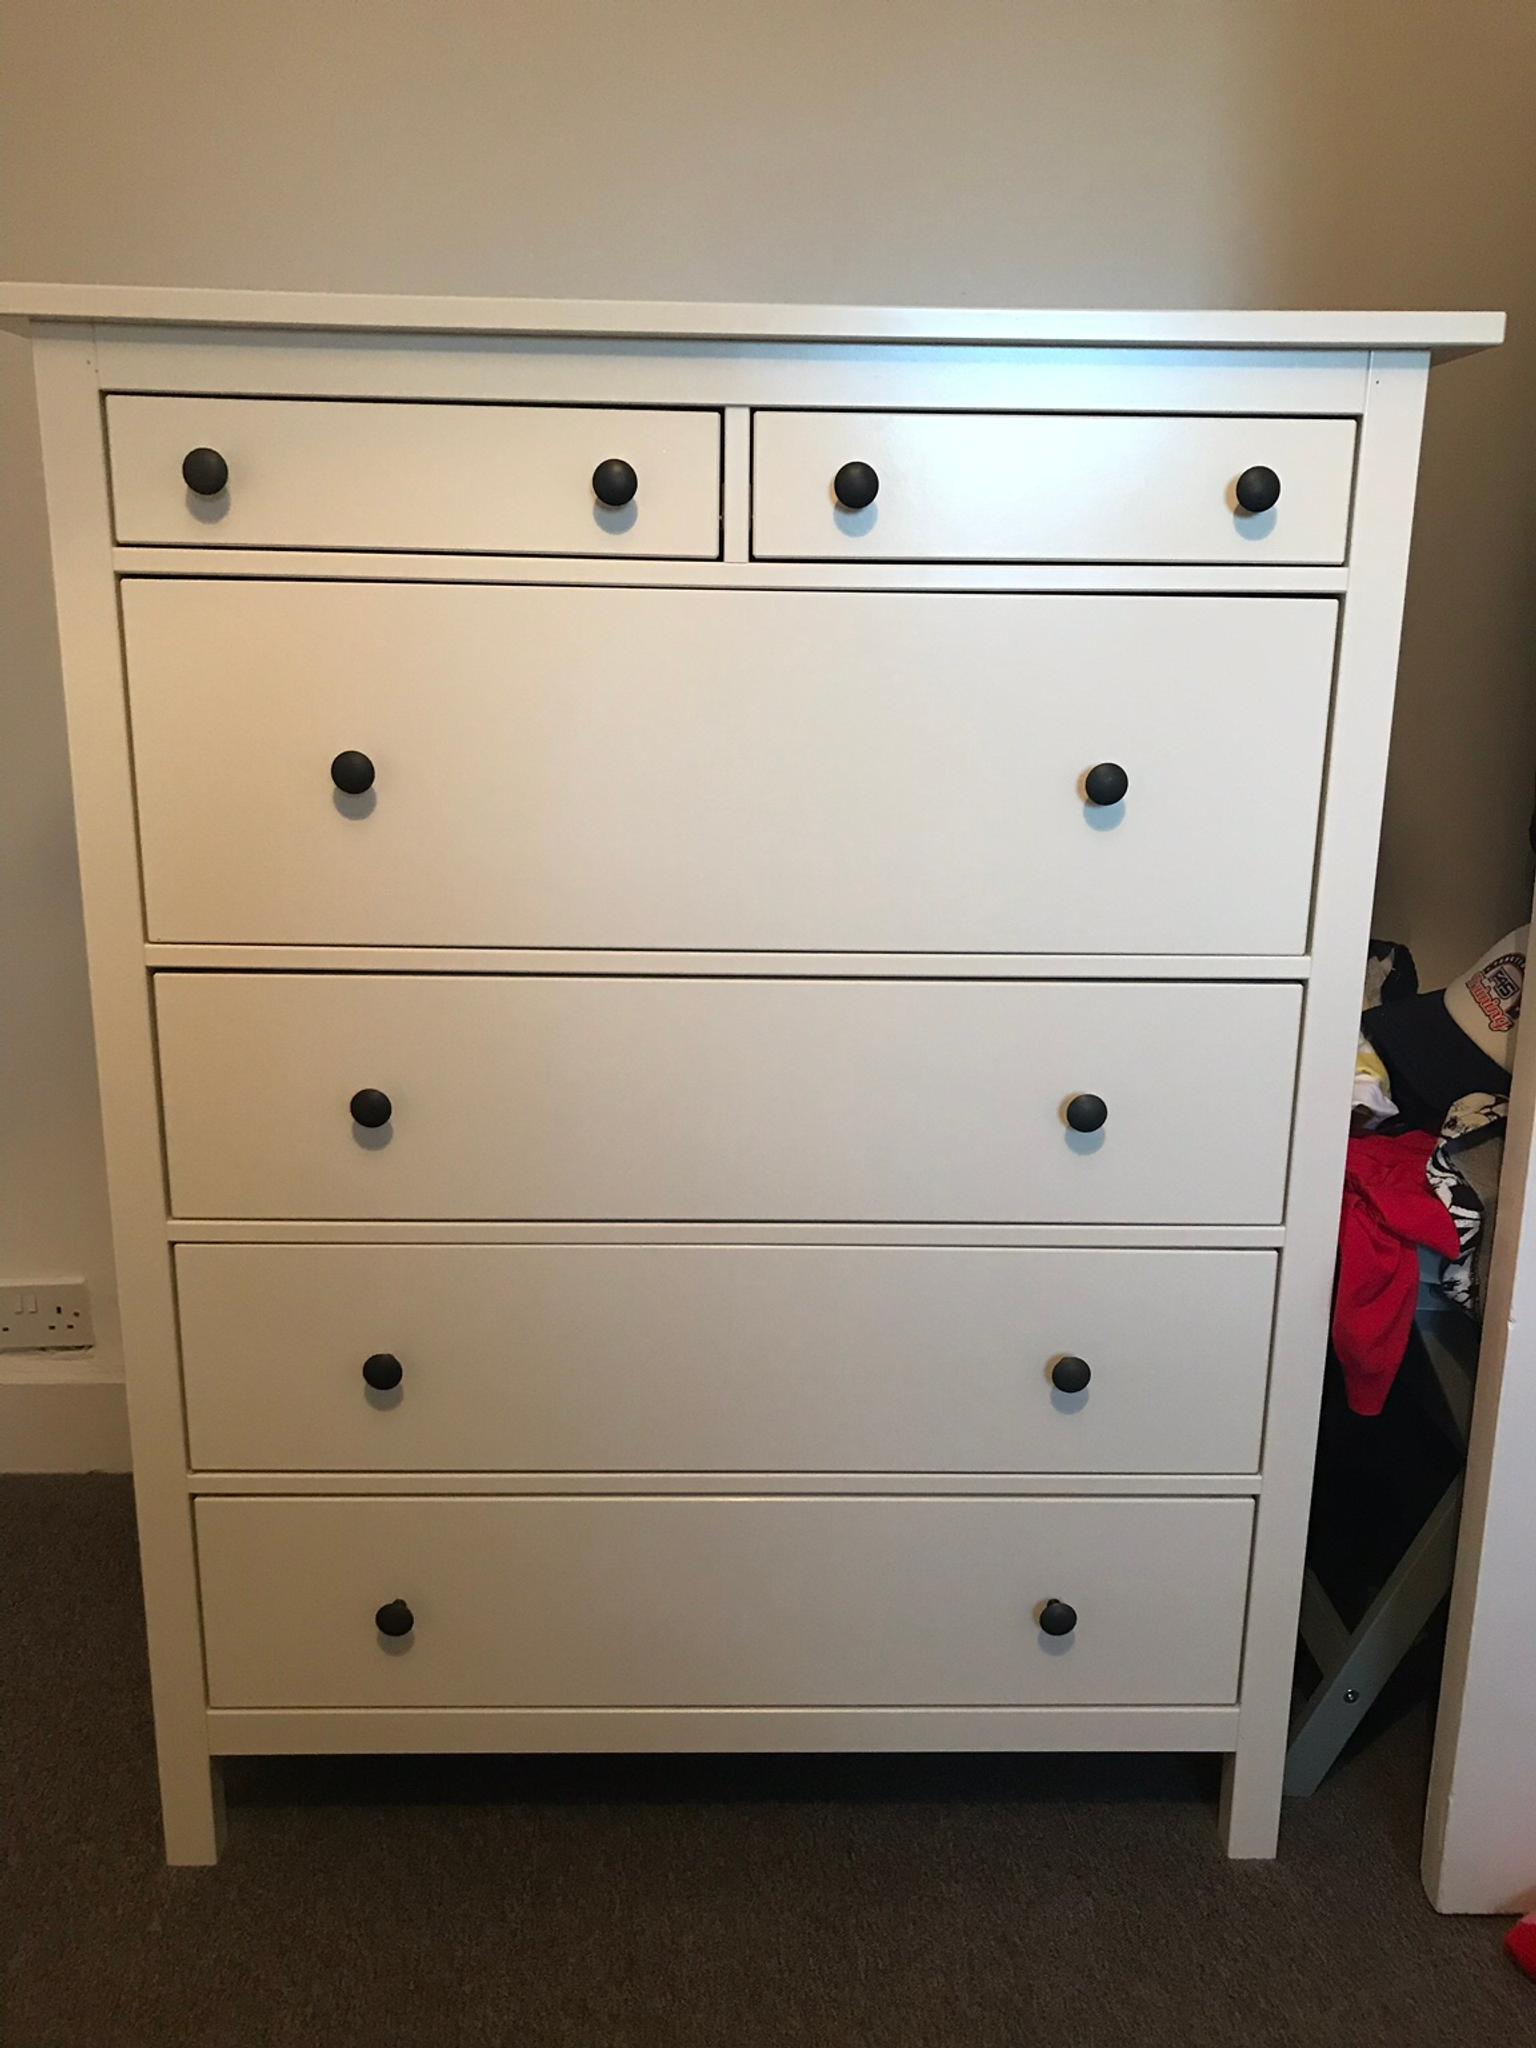 Ikea Hemnes Chest Of 8 Drawers In Sw13 Thames For 45 00 For Sale